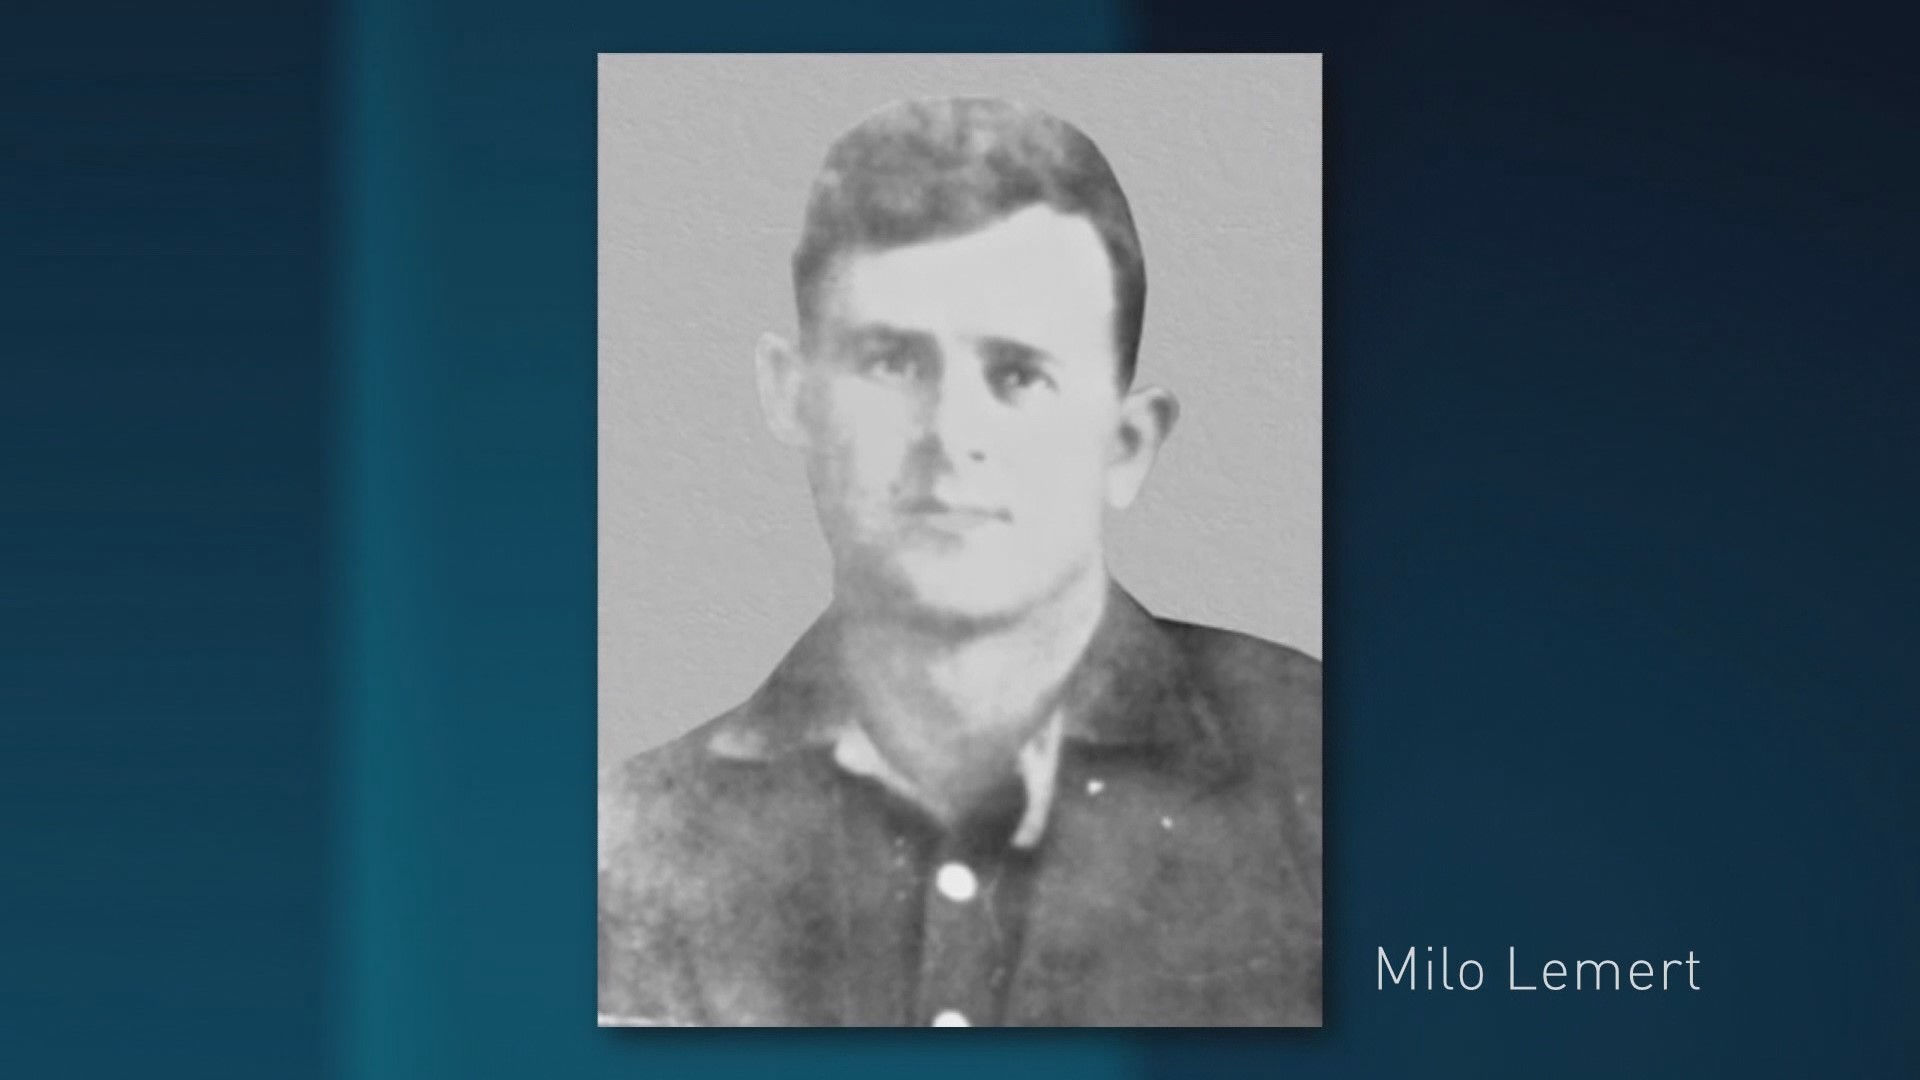 Out of the millions who have served in the U.S. Armed Forces, only 3,507 have received the Medal of Honor. Milo Lemert is one of 14 recipients from East Tennessee.